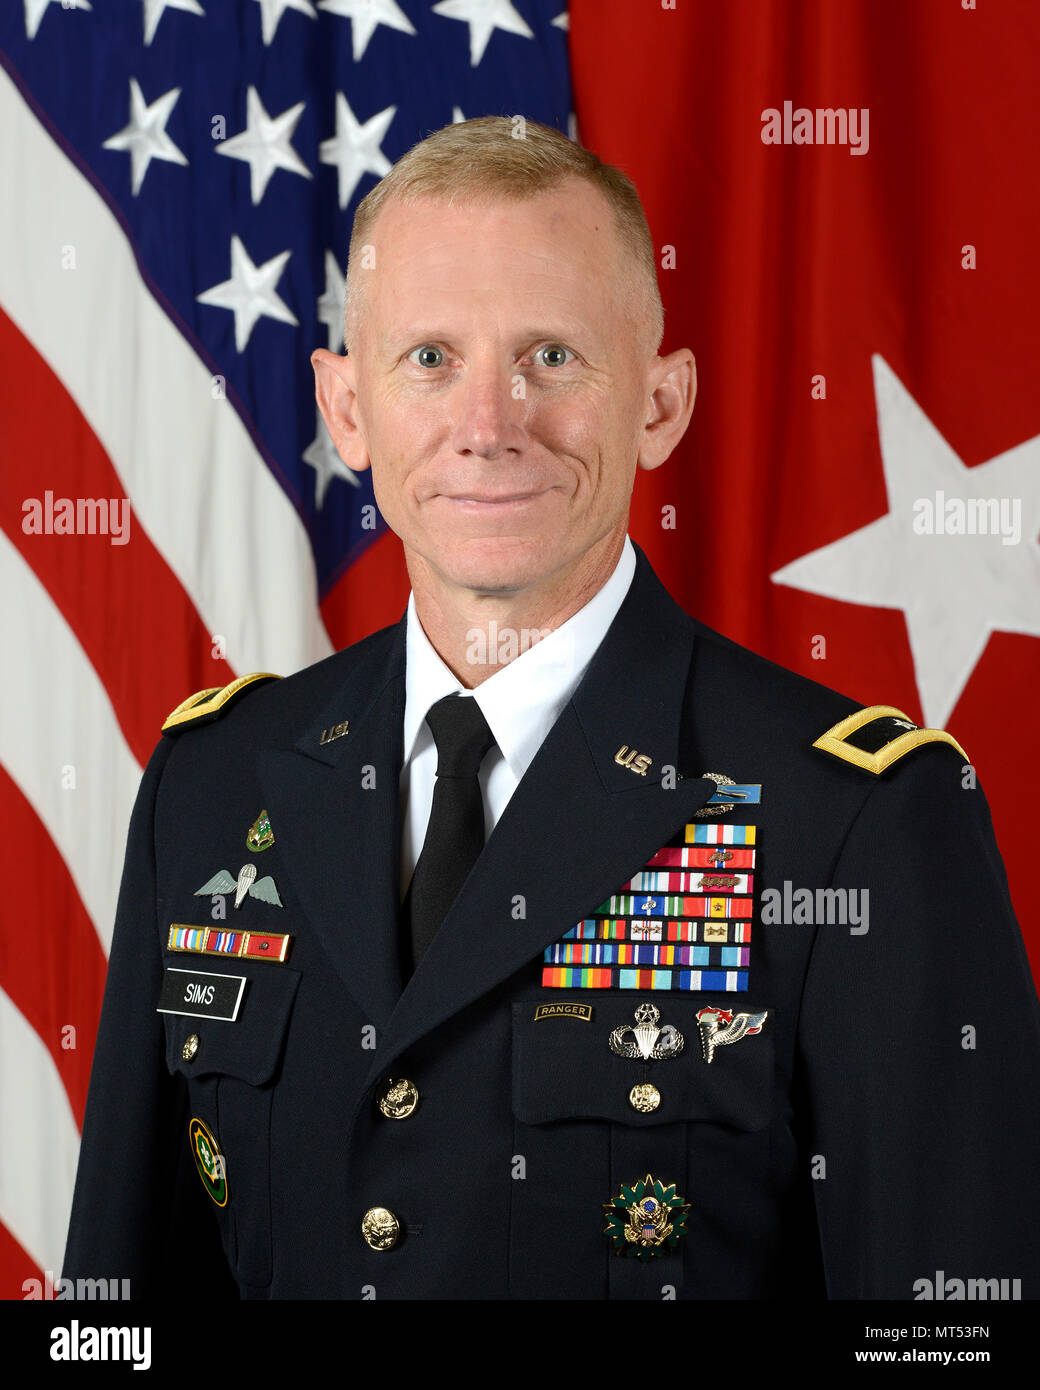 U.S. Army Brig. Gen. Douglas A. Sims, Director of Operations, Readiness and Mobilization (Army G3/5/7), poses for a command portrait in the Army portrait studio at the Pentagon in Arlington, VA, July 19, 2017.  (U.S. Army photo by Monica King/Released) Stock Photo